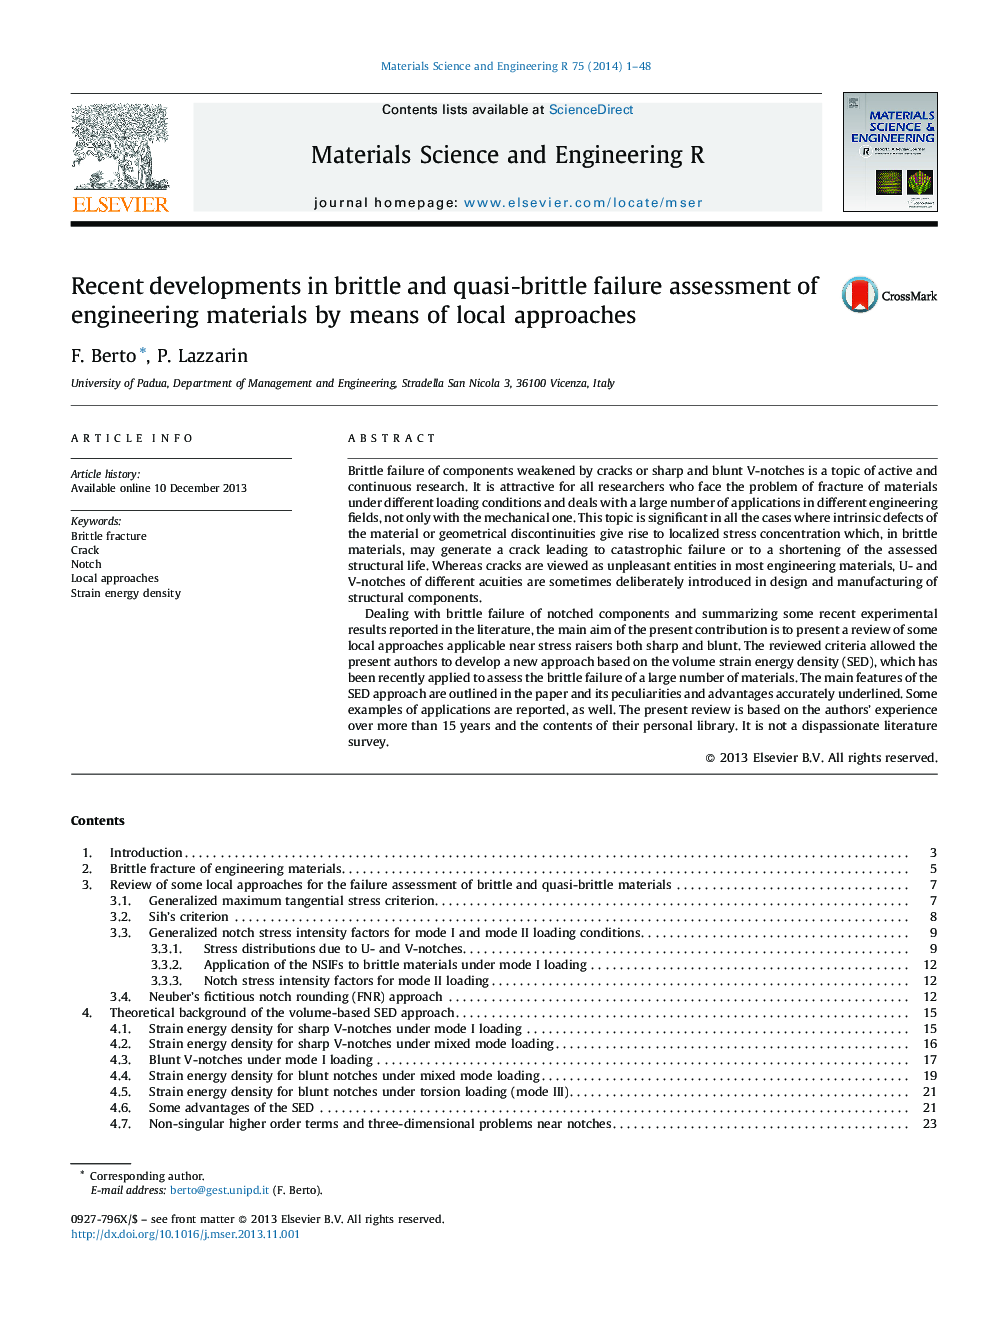 Recent developments in brittle and quasi-brittle failure assessment of engineering materials by means of local approaches